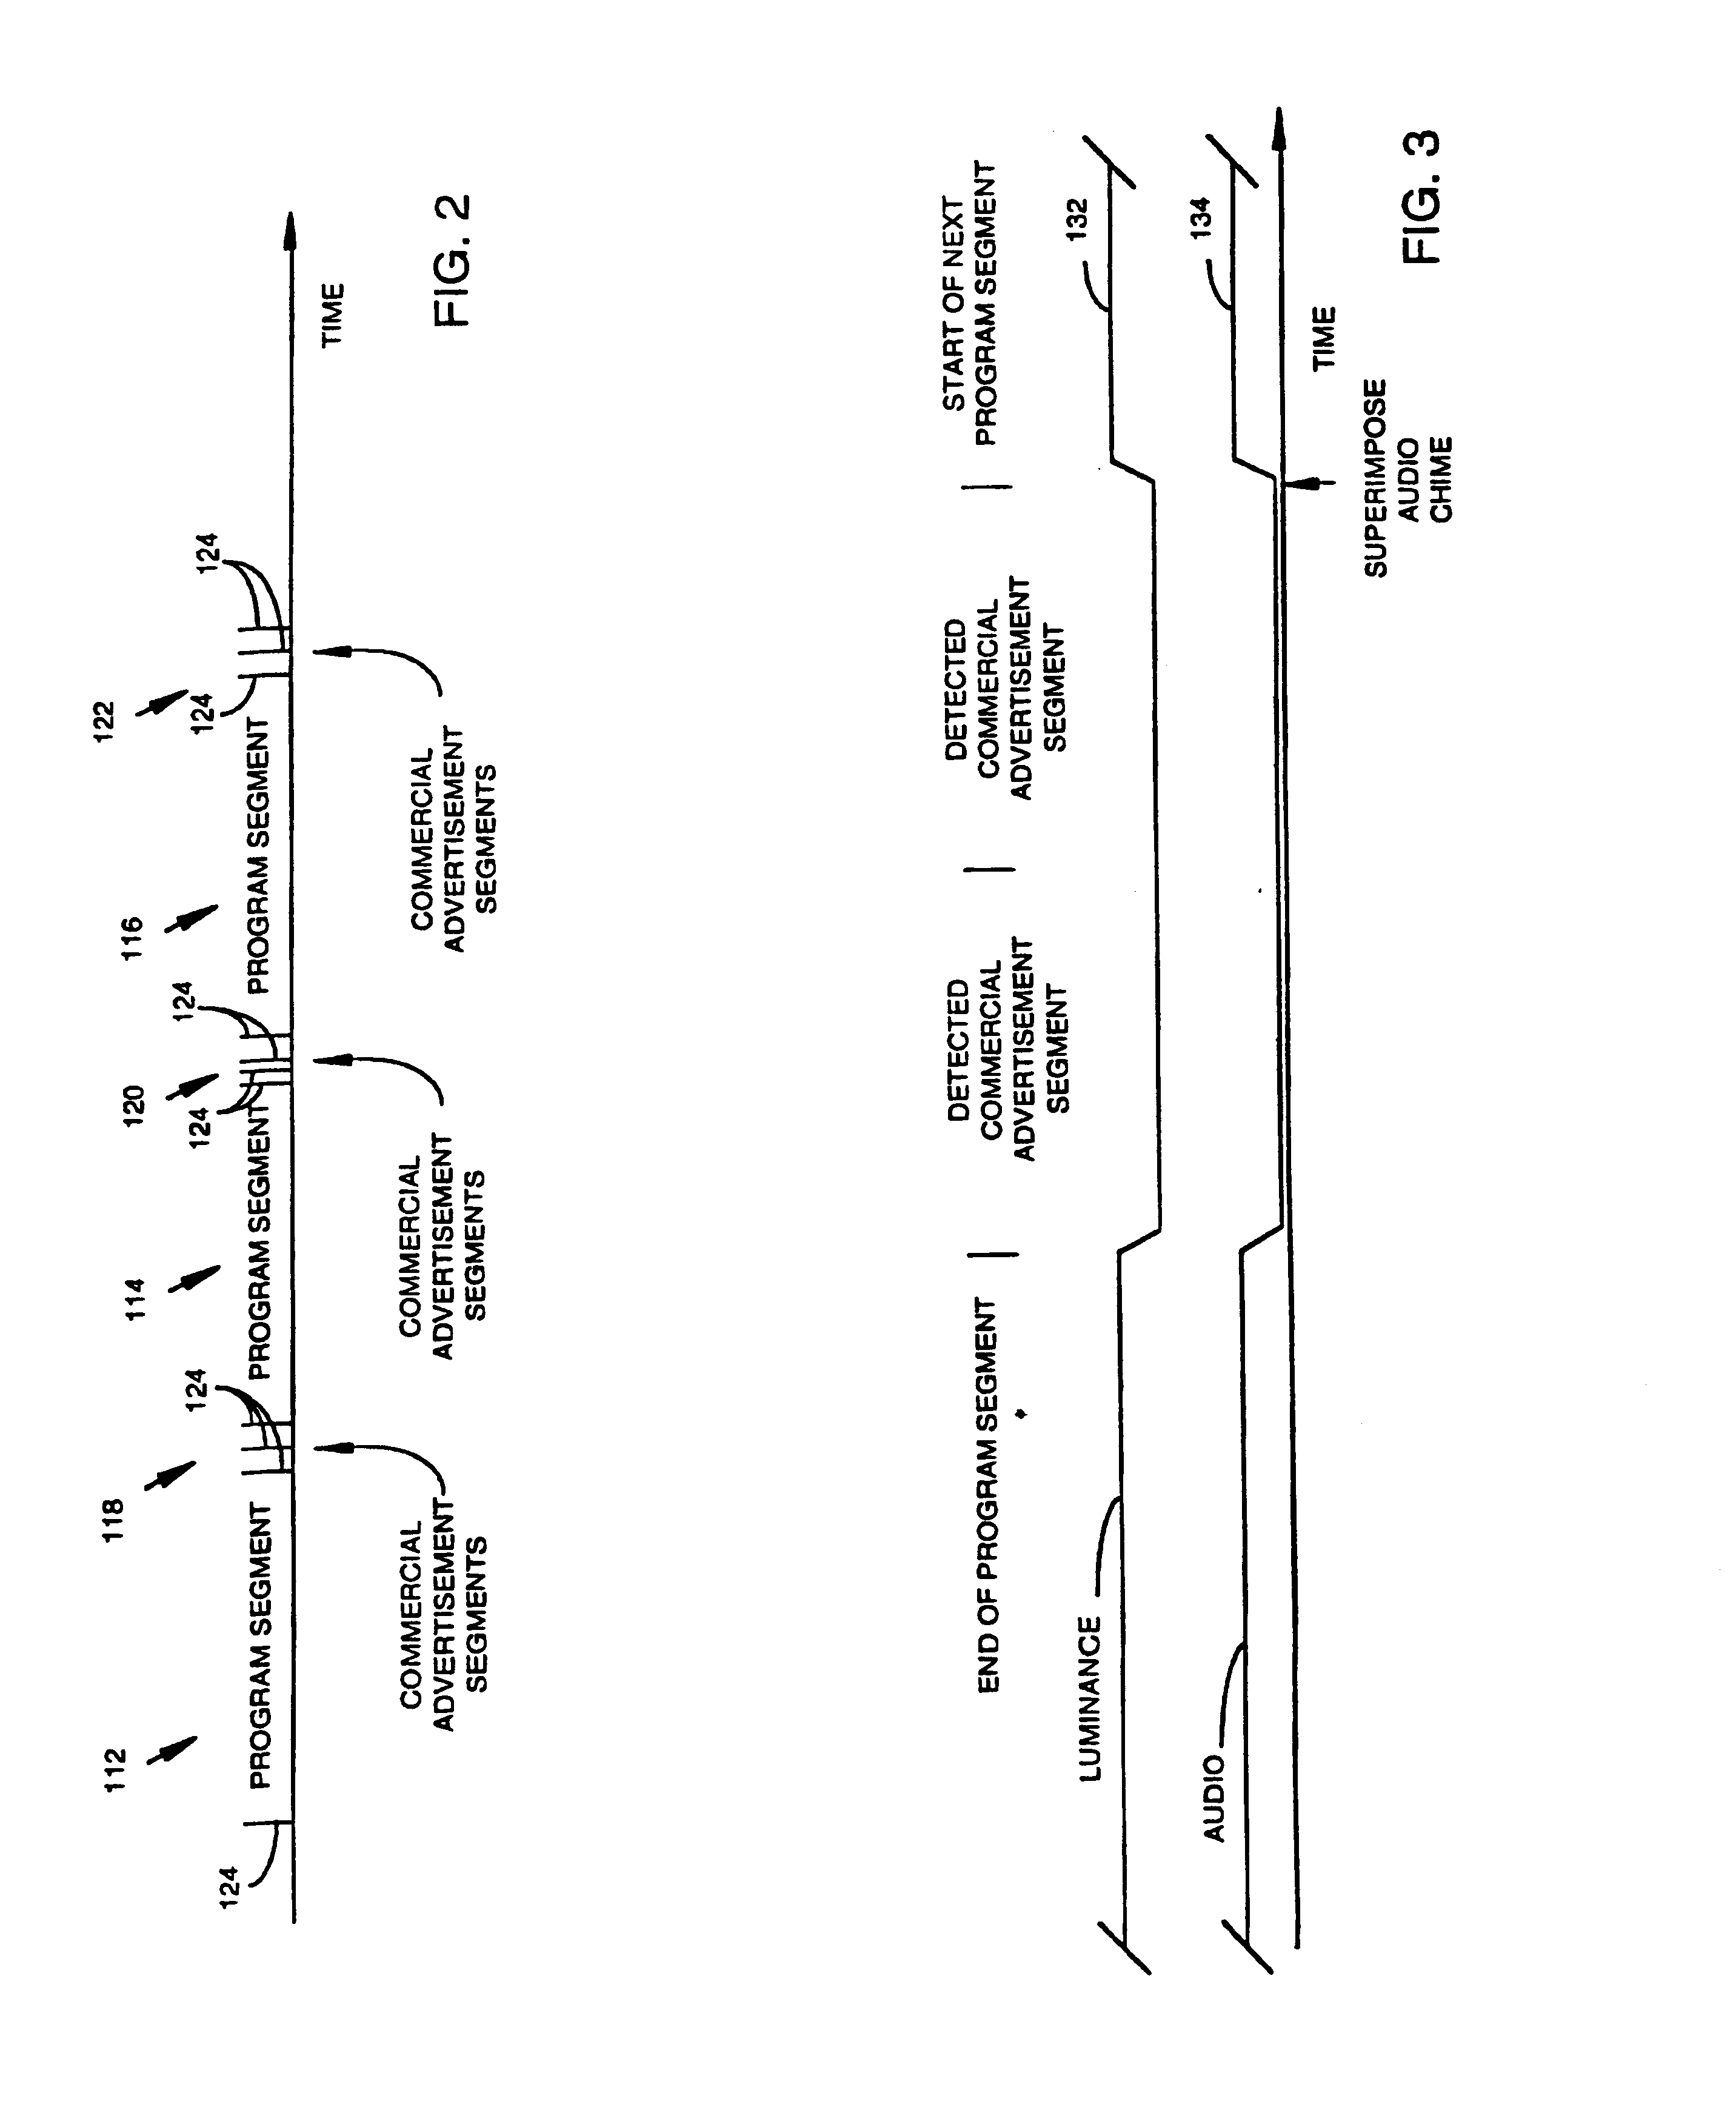 Method and apparatus for selectively altering a television video signal in real-time